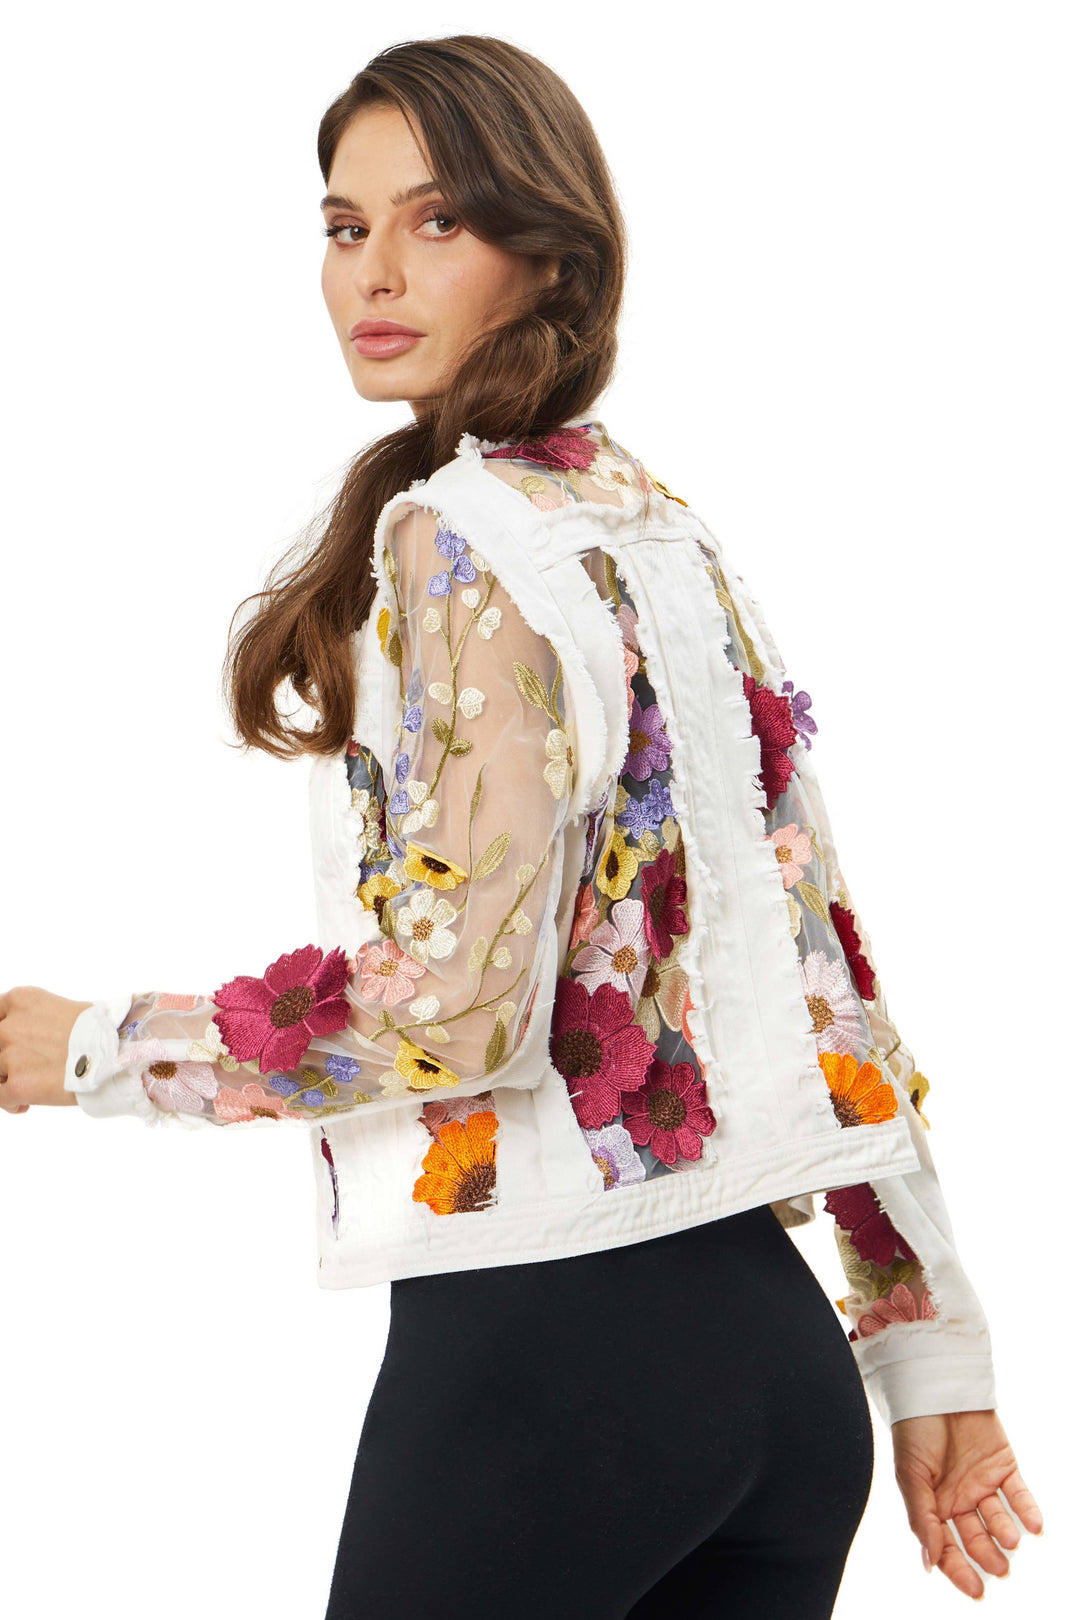 White Denim Jacket with Floral Embroidery: XL